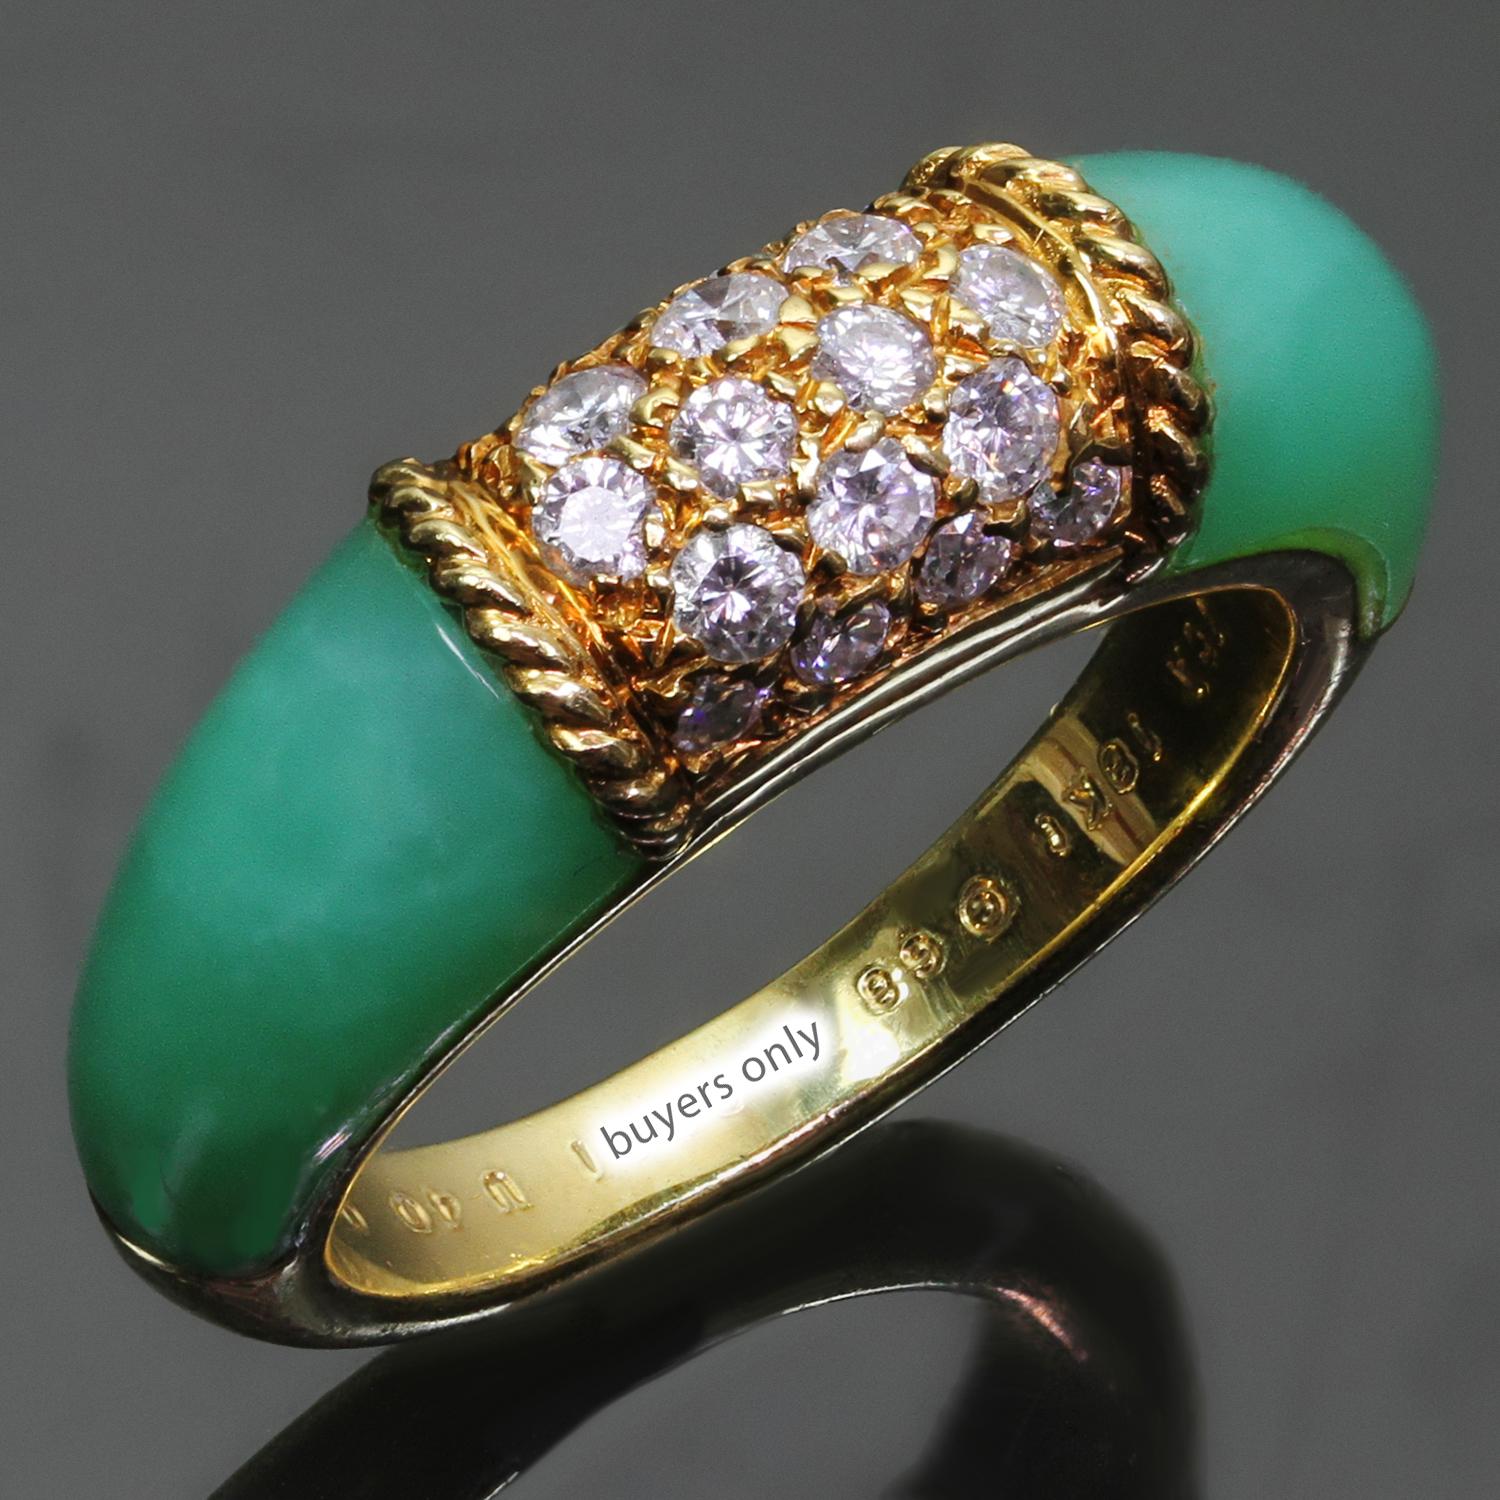 This rare vintage Van Cleef & Arpels ring from the gorgeous Philippines collection is crafted in 18k yellow gold and set with green chalcedony sidestones and brilliant-cut round E-F-G  VVS1-VVS2 diamonds weighing an estimated 0.50 carats. Made in